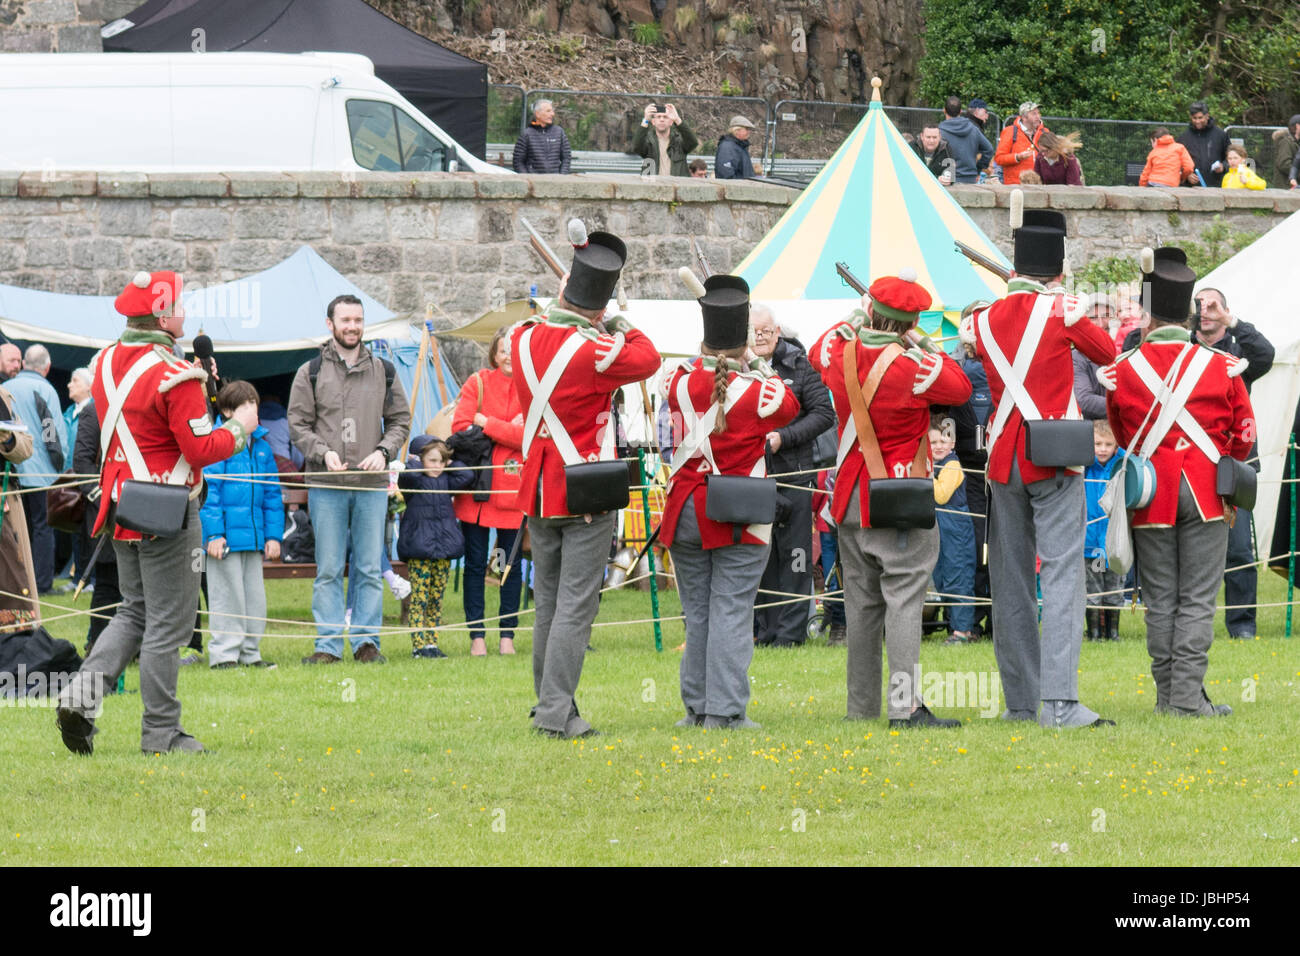 Dumbarton, West Dunbartonshire, Scotland, UK - 11 June 2017: UK weather - a gusty showery day or being in the firing line of Napoleonic soldiers didn't dampen the spirits of visitors to The Rock of Ages - a  two day costume celebration of Scotland's history through the ages at Dumbarton Castle Credit: Kay Roxby/Alamy Live News Stock Photo